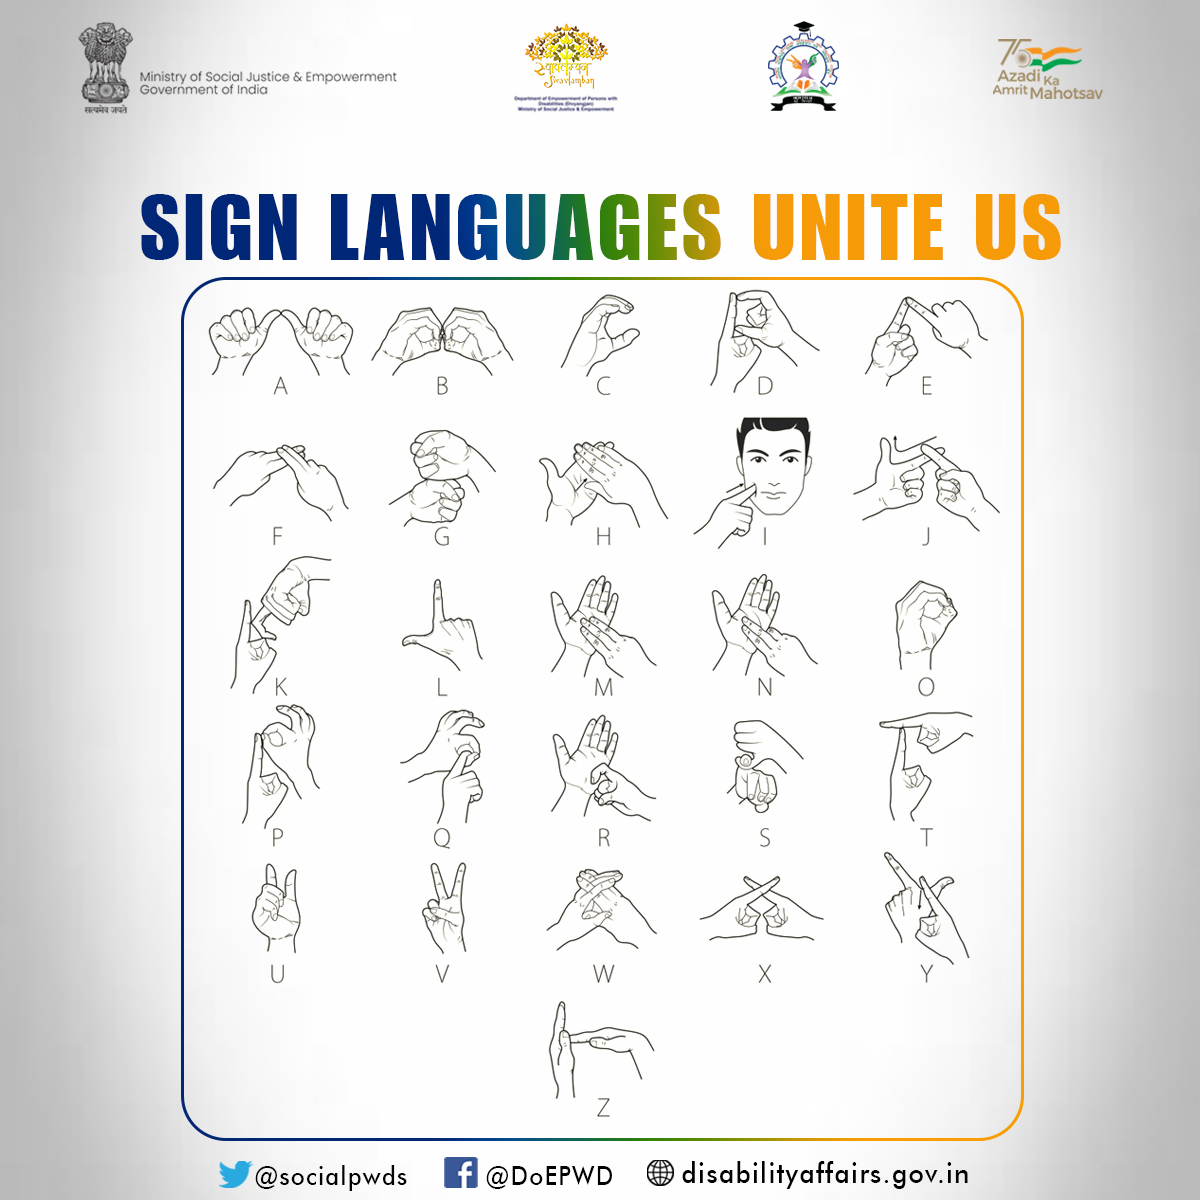 International day of sign language is the day when the tone of voice is not judged and people come together through actions and intentions rather than words.

#SignLanguageDay2022 #SignLanguagesUniteus  #OneNationOneSignLanguage